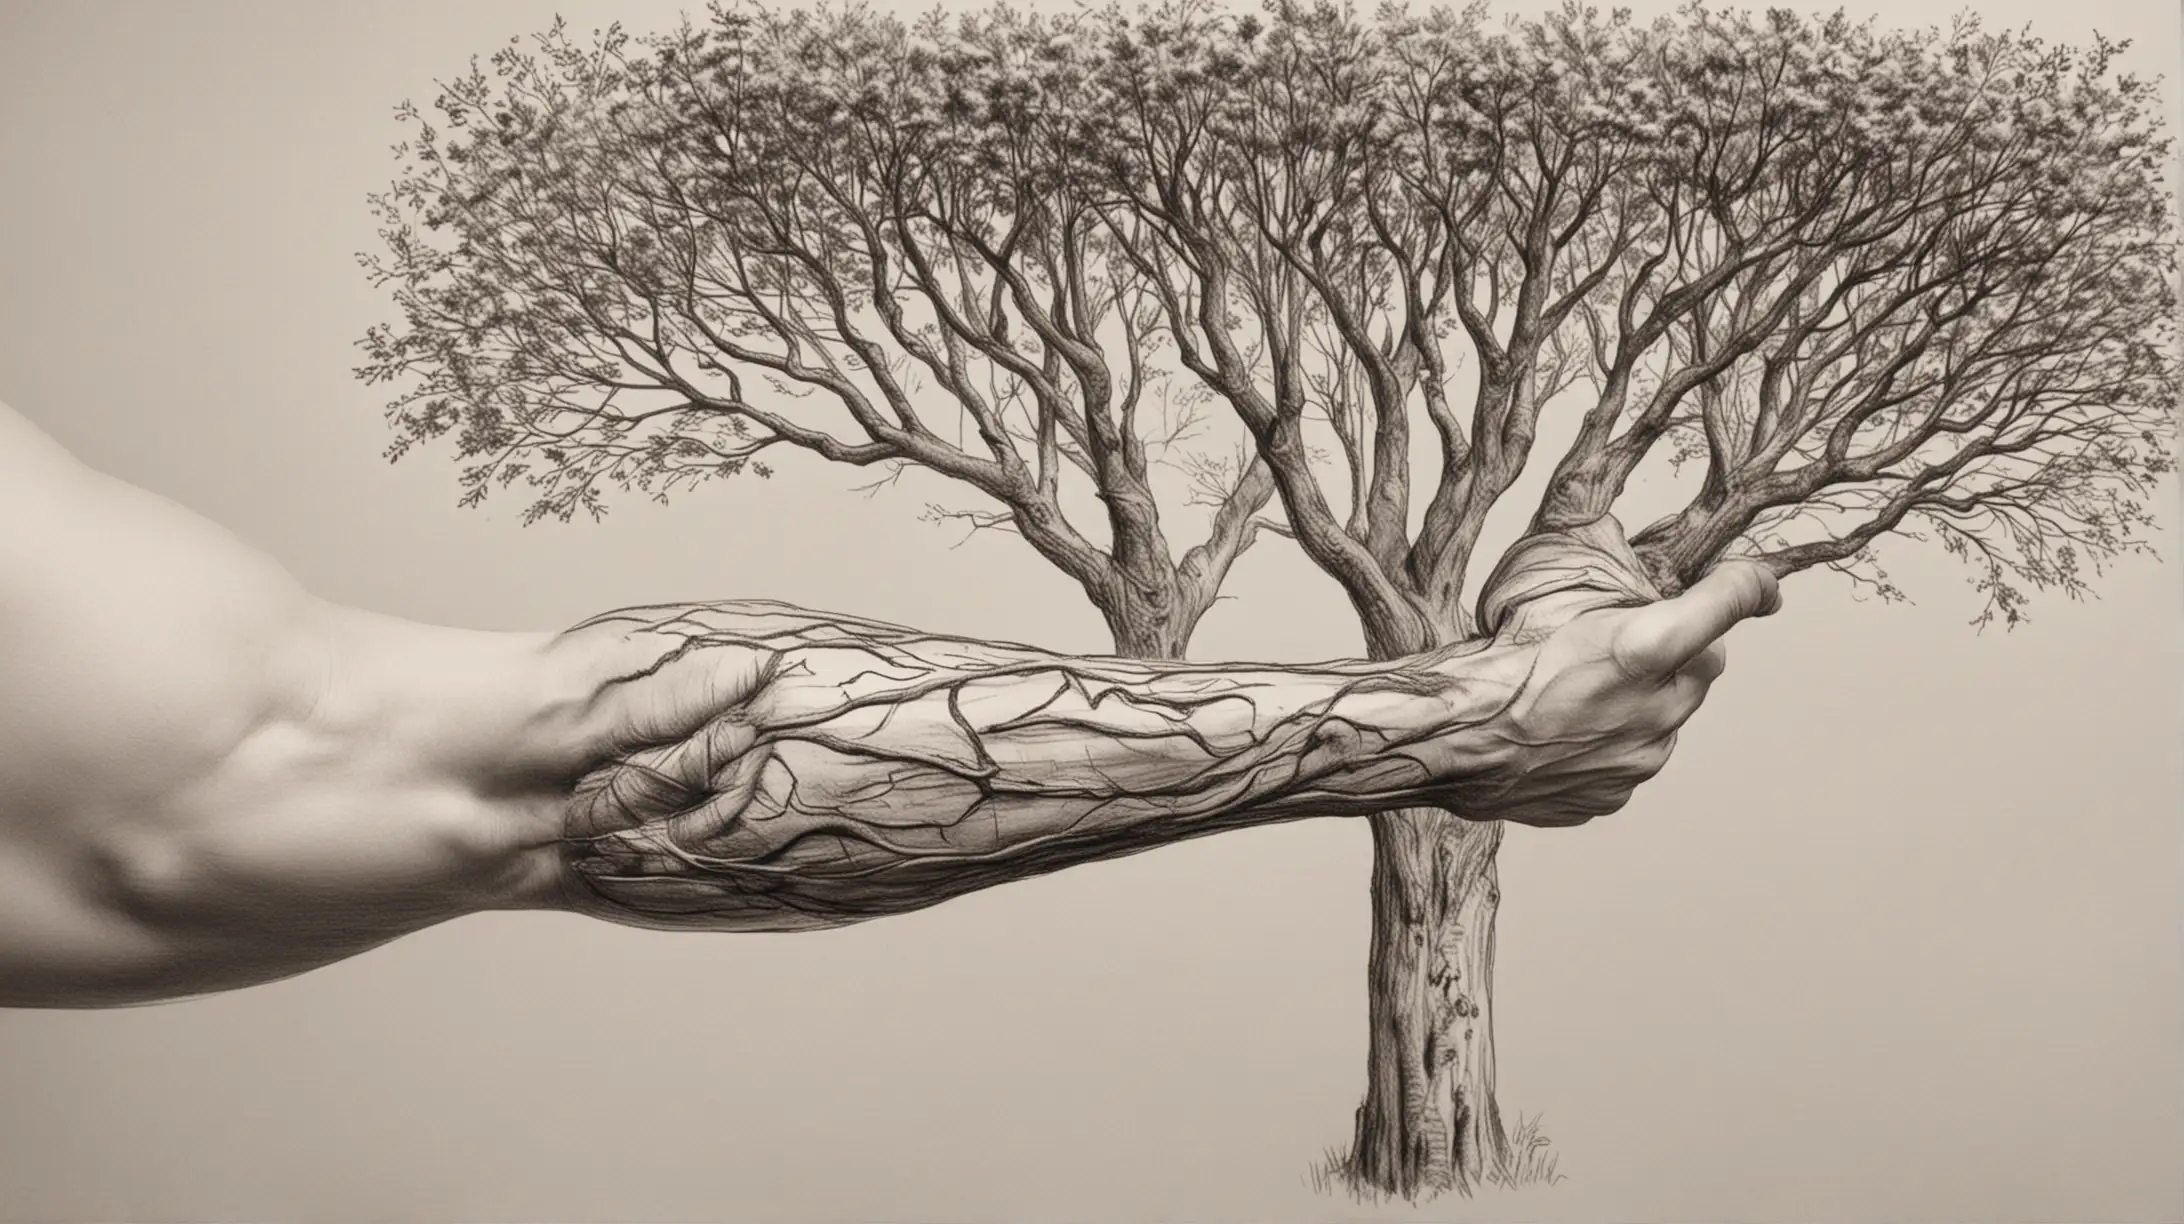 draw an arm with trees

